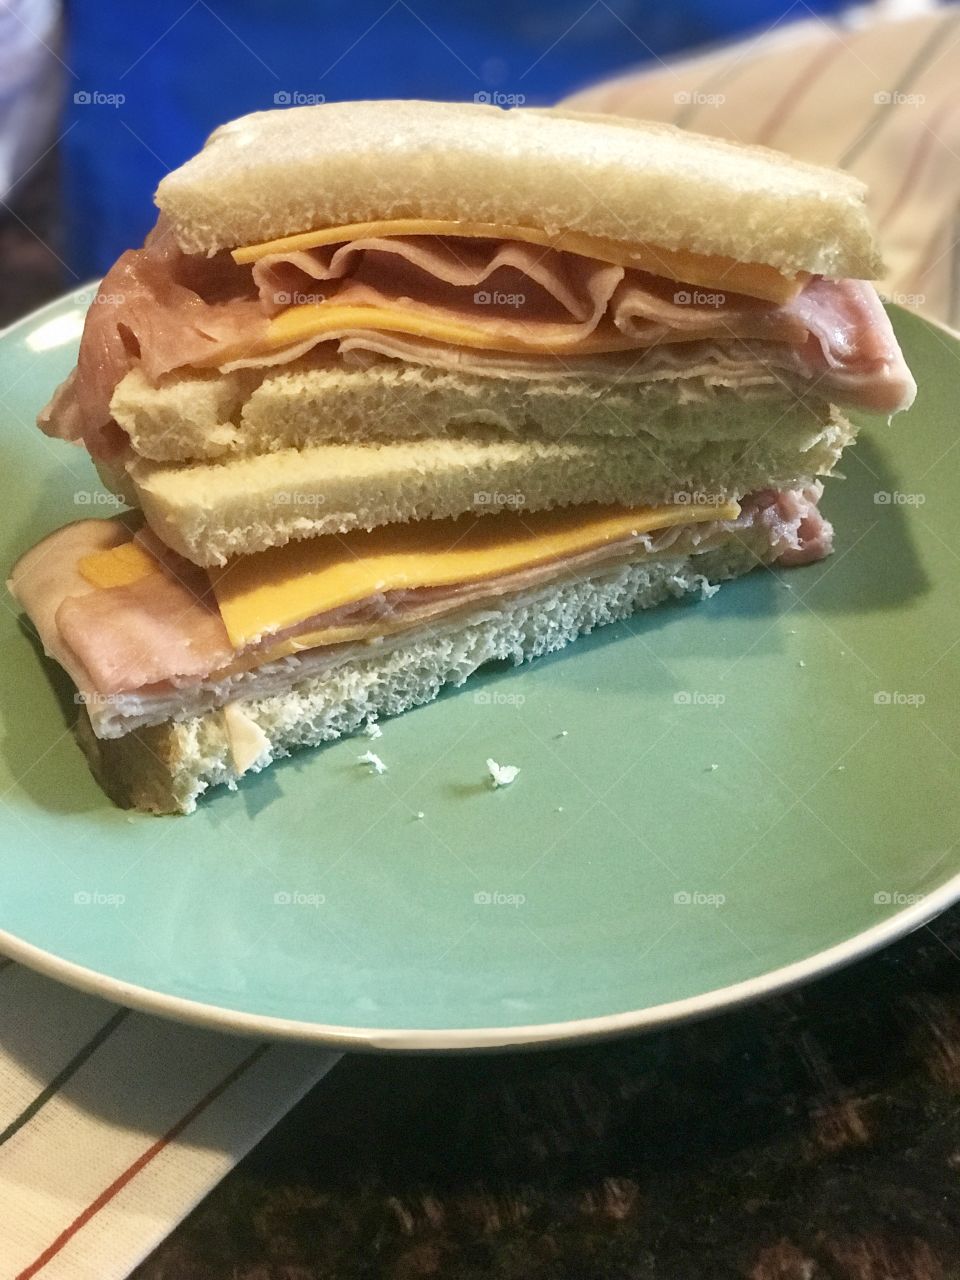   A Yummy and delicious cheddar cheese and ham sandwich served for lunch on a plate. USA, America 